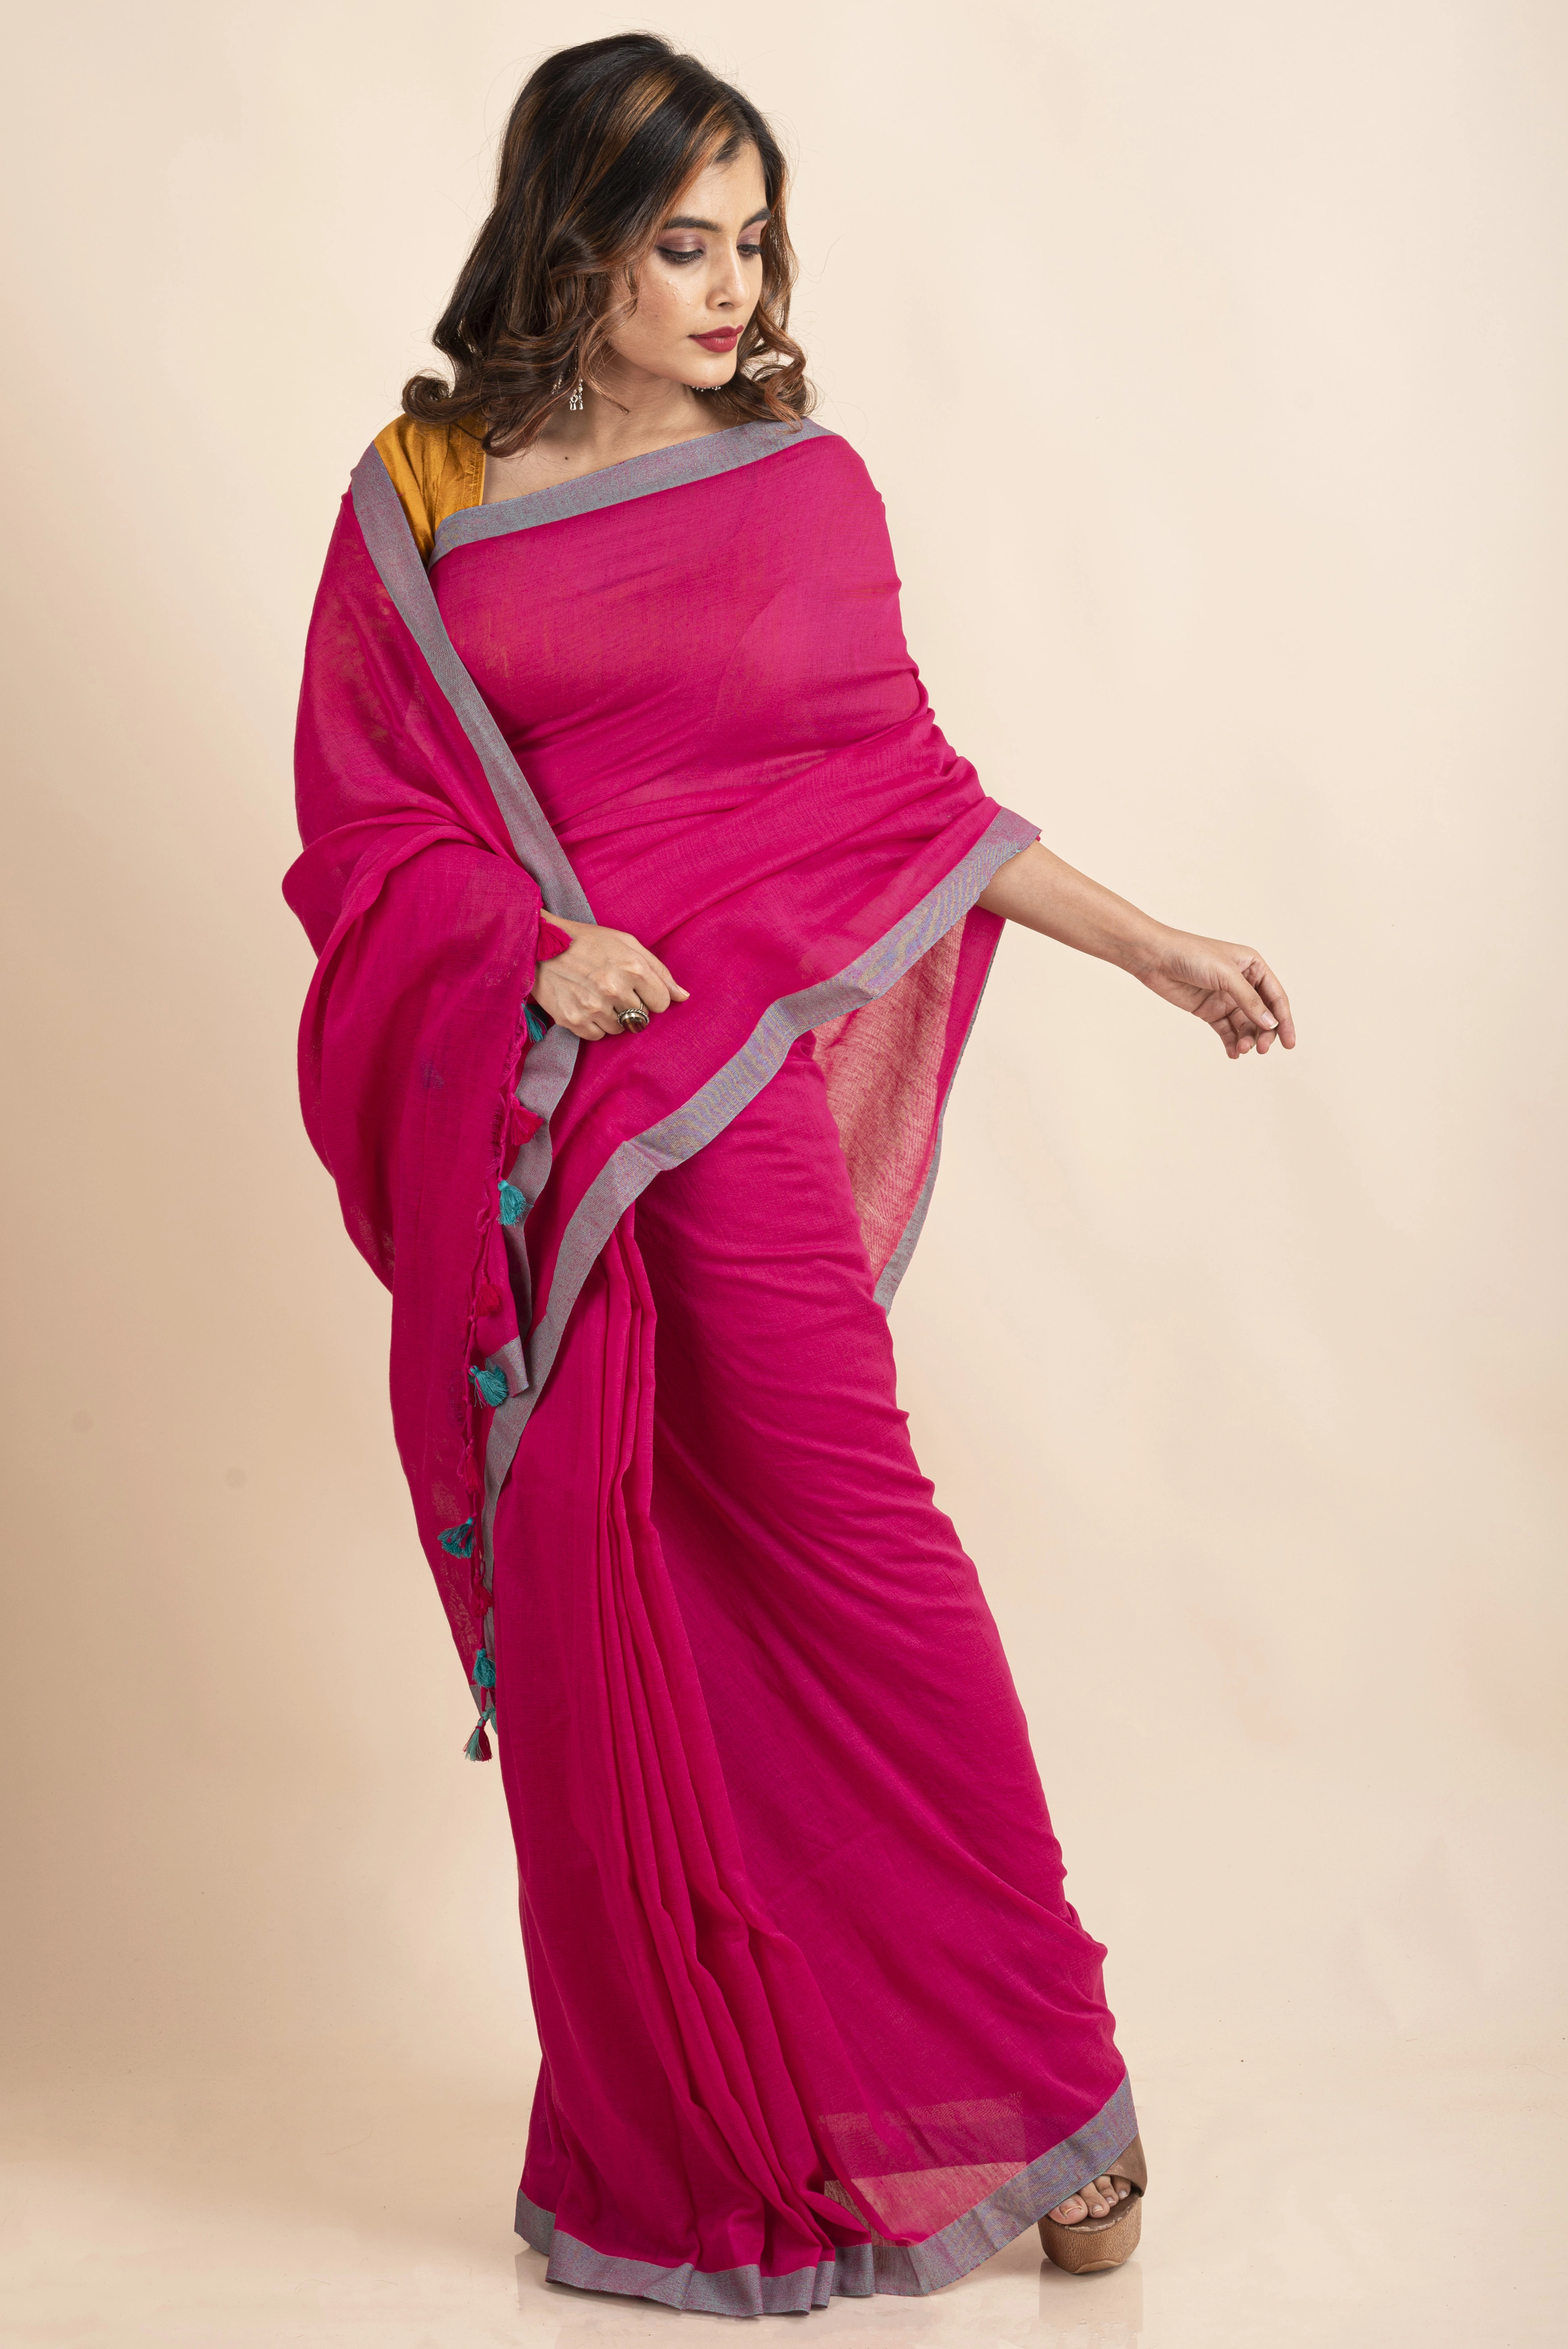 Fuchsia Pink Handloom Cotton Teal Green Border Saree with Blouse Piece-Pink-Cotton-One Size-Sari-Female-Adult-2